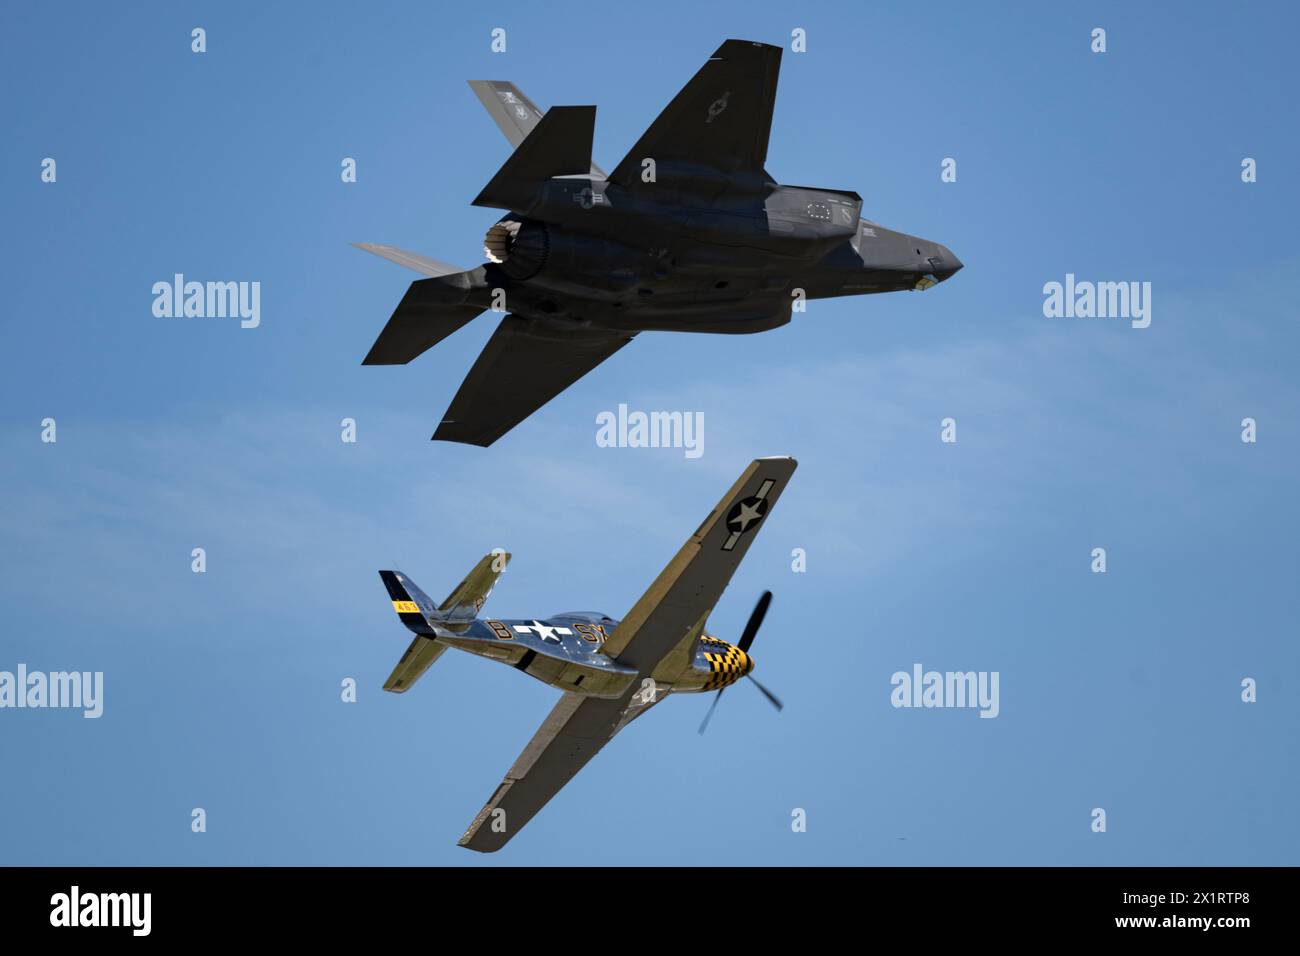 A P-51 Mustang flies in formation with Capt. Melanie “MACH” Kluesner, F-35A Lightning II Demonstration Team pilot and commander, during the SUN ‘n FUN Stock Photo